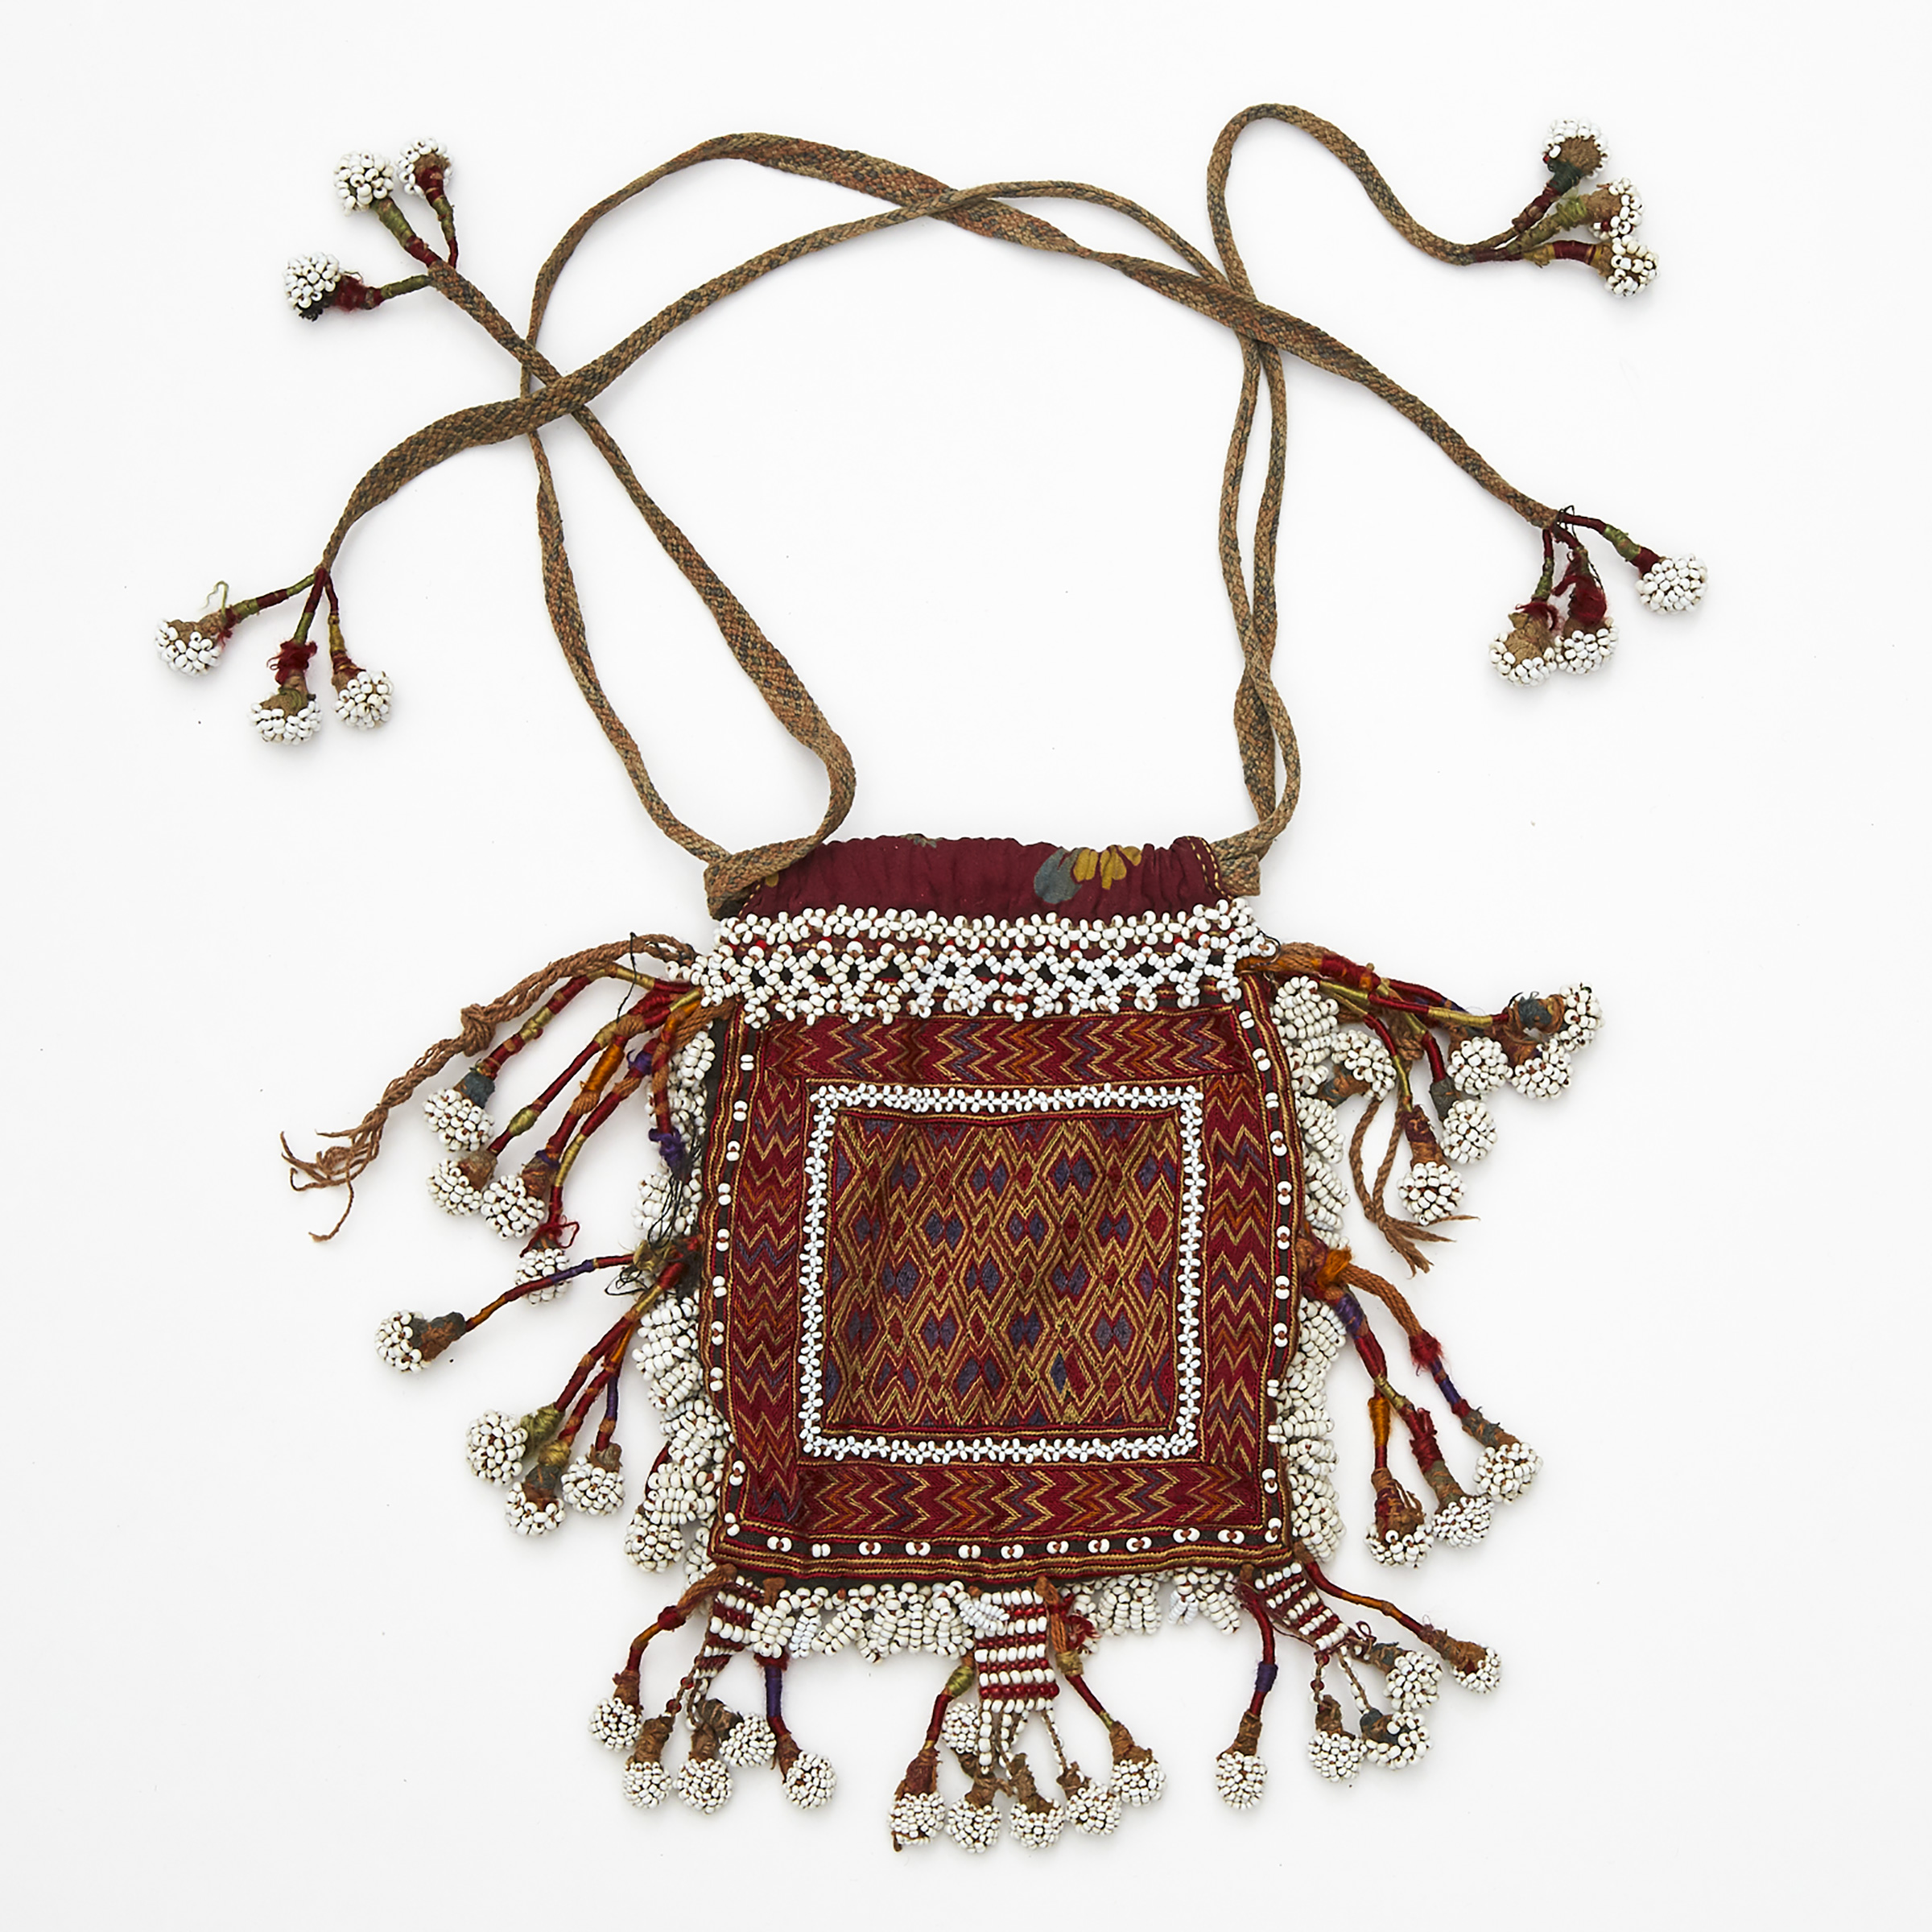 Pashtun Beaded Pouch, Afghanistan, mid 20th century